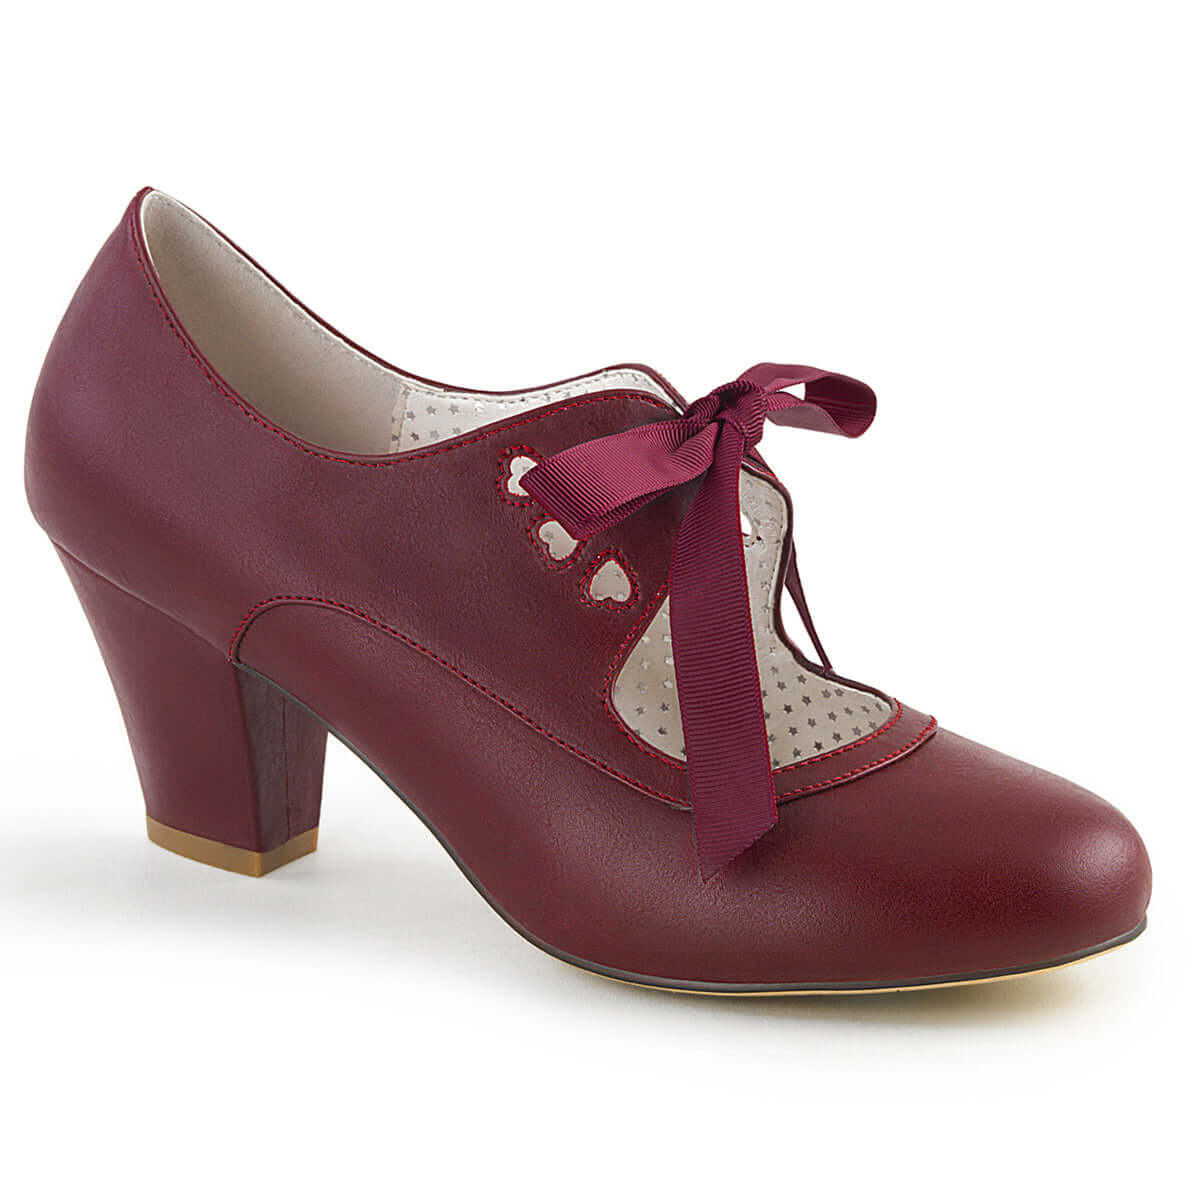 40s Inspired Cuban Heel Mary Jane Pump In Burgundy Red